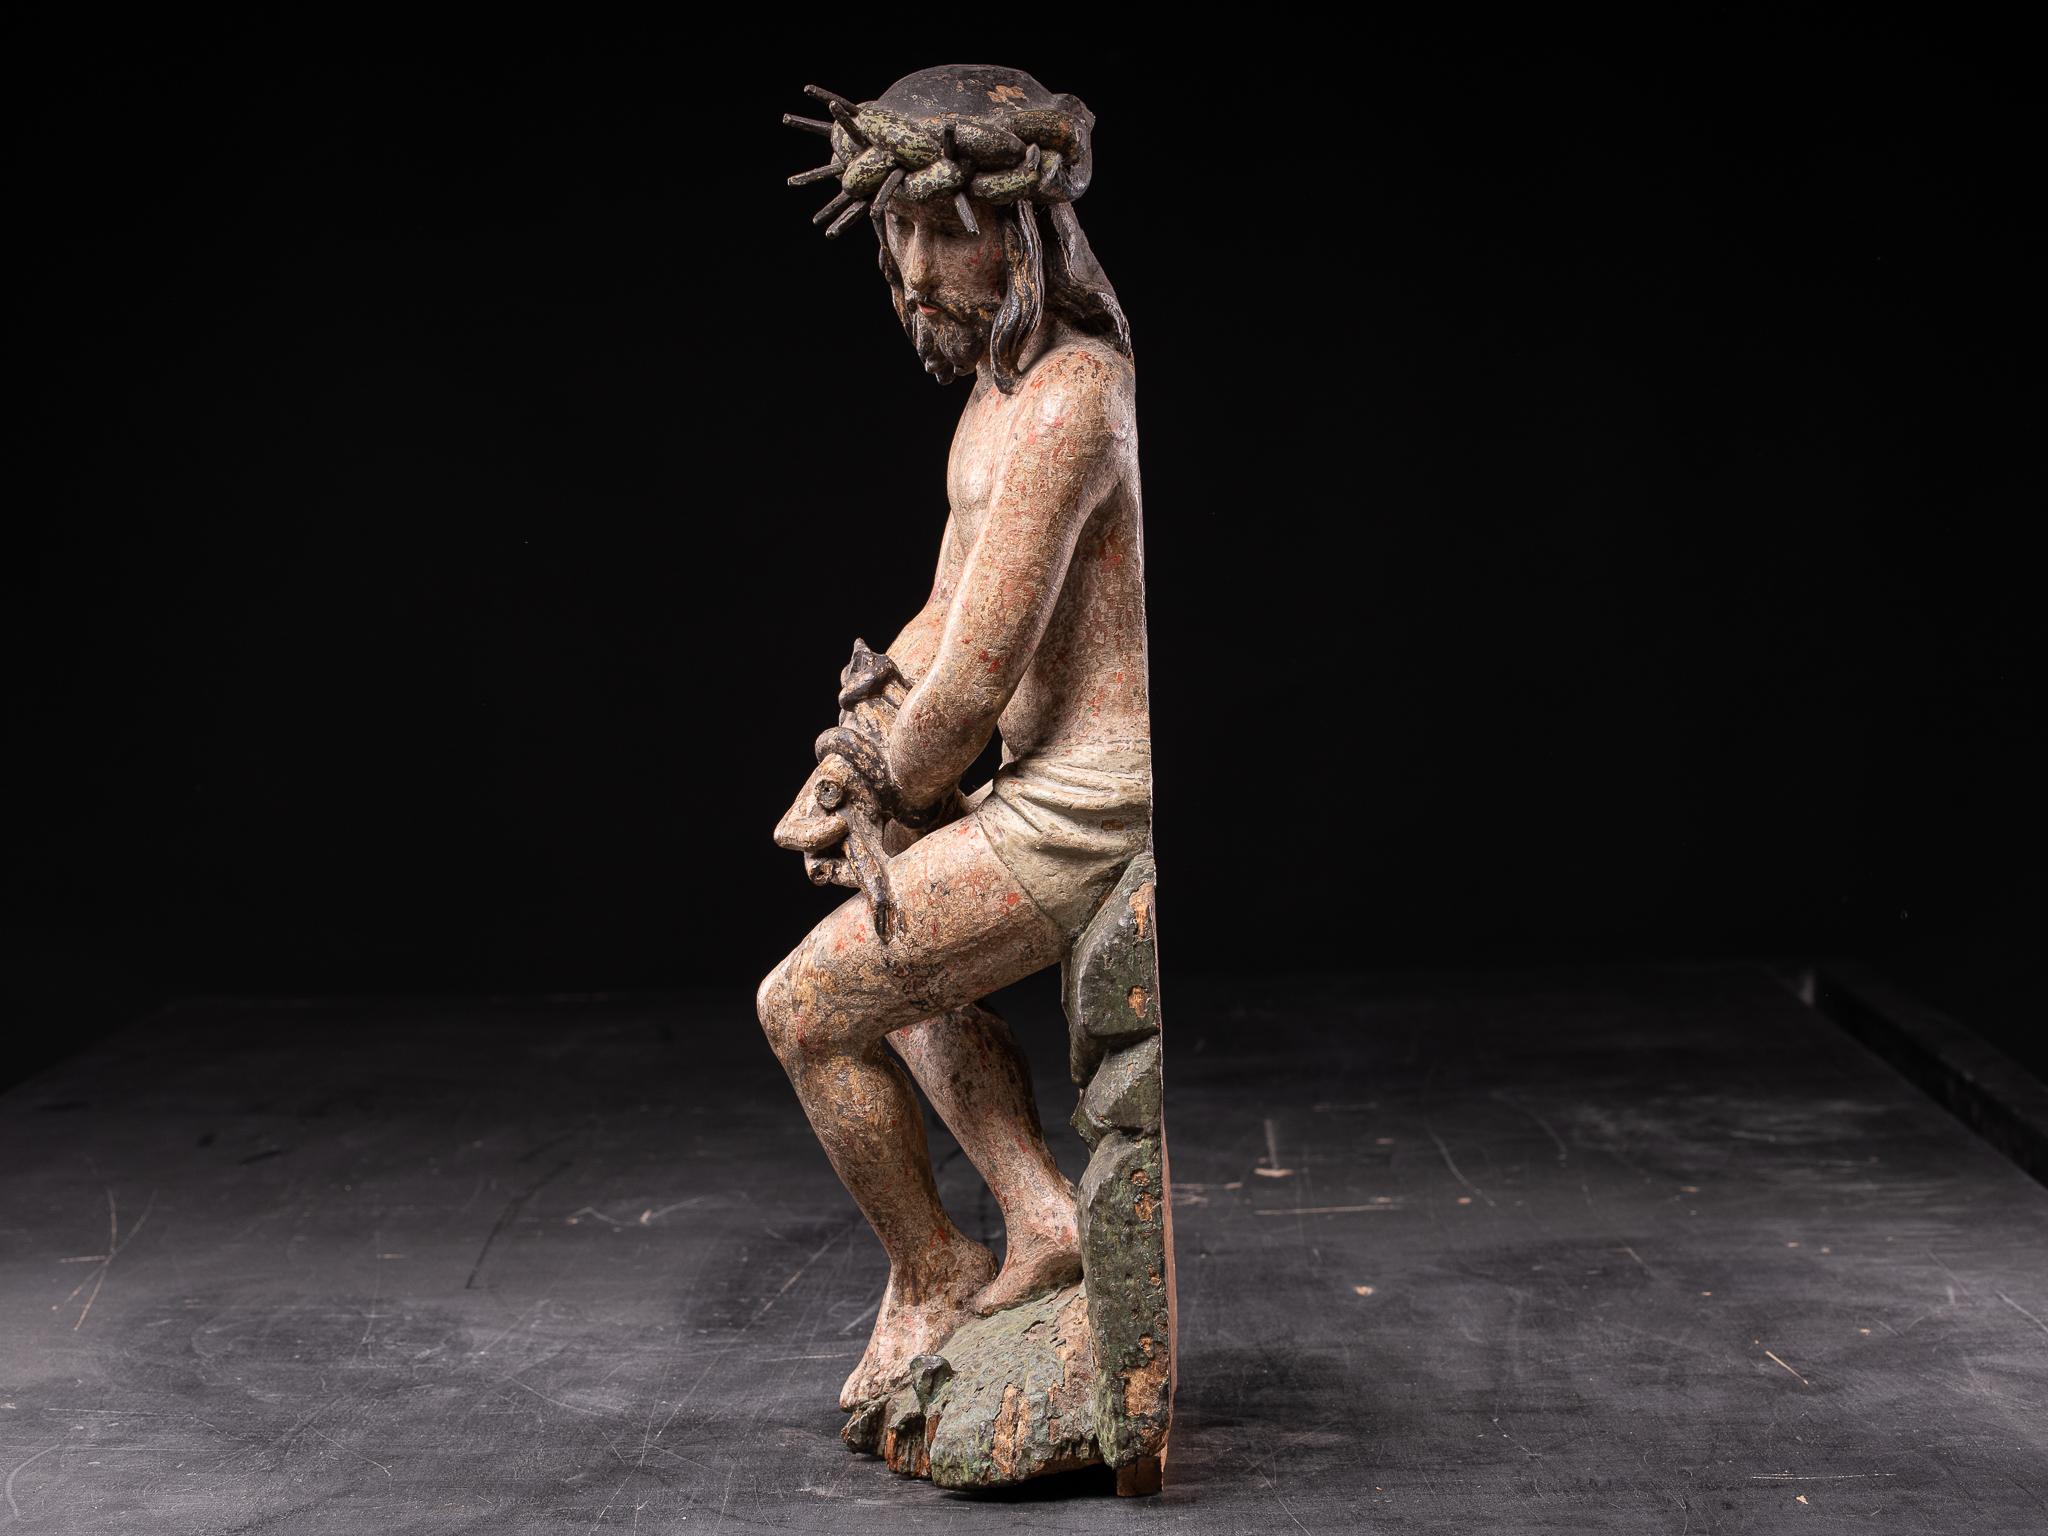 Late 16th C Polychromed wooden sculpture of Christ with the Crown of Thorns on the cold stone with his hands crossed in his lap, the moment after the calvary and immediately before the crucifixion. Soft and tender face, the eyes downcast, His whole